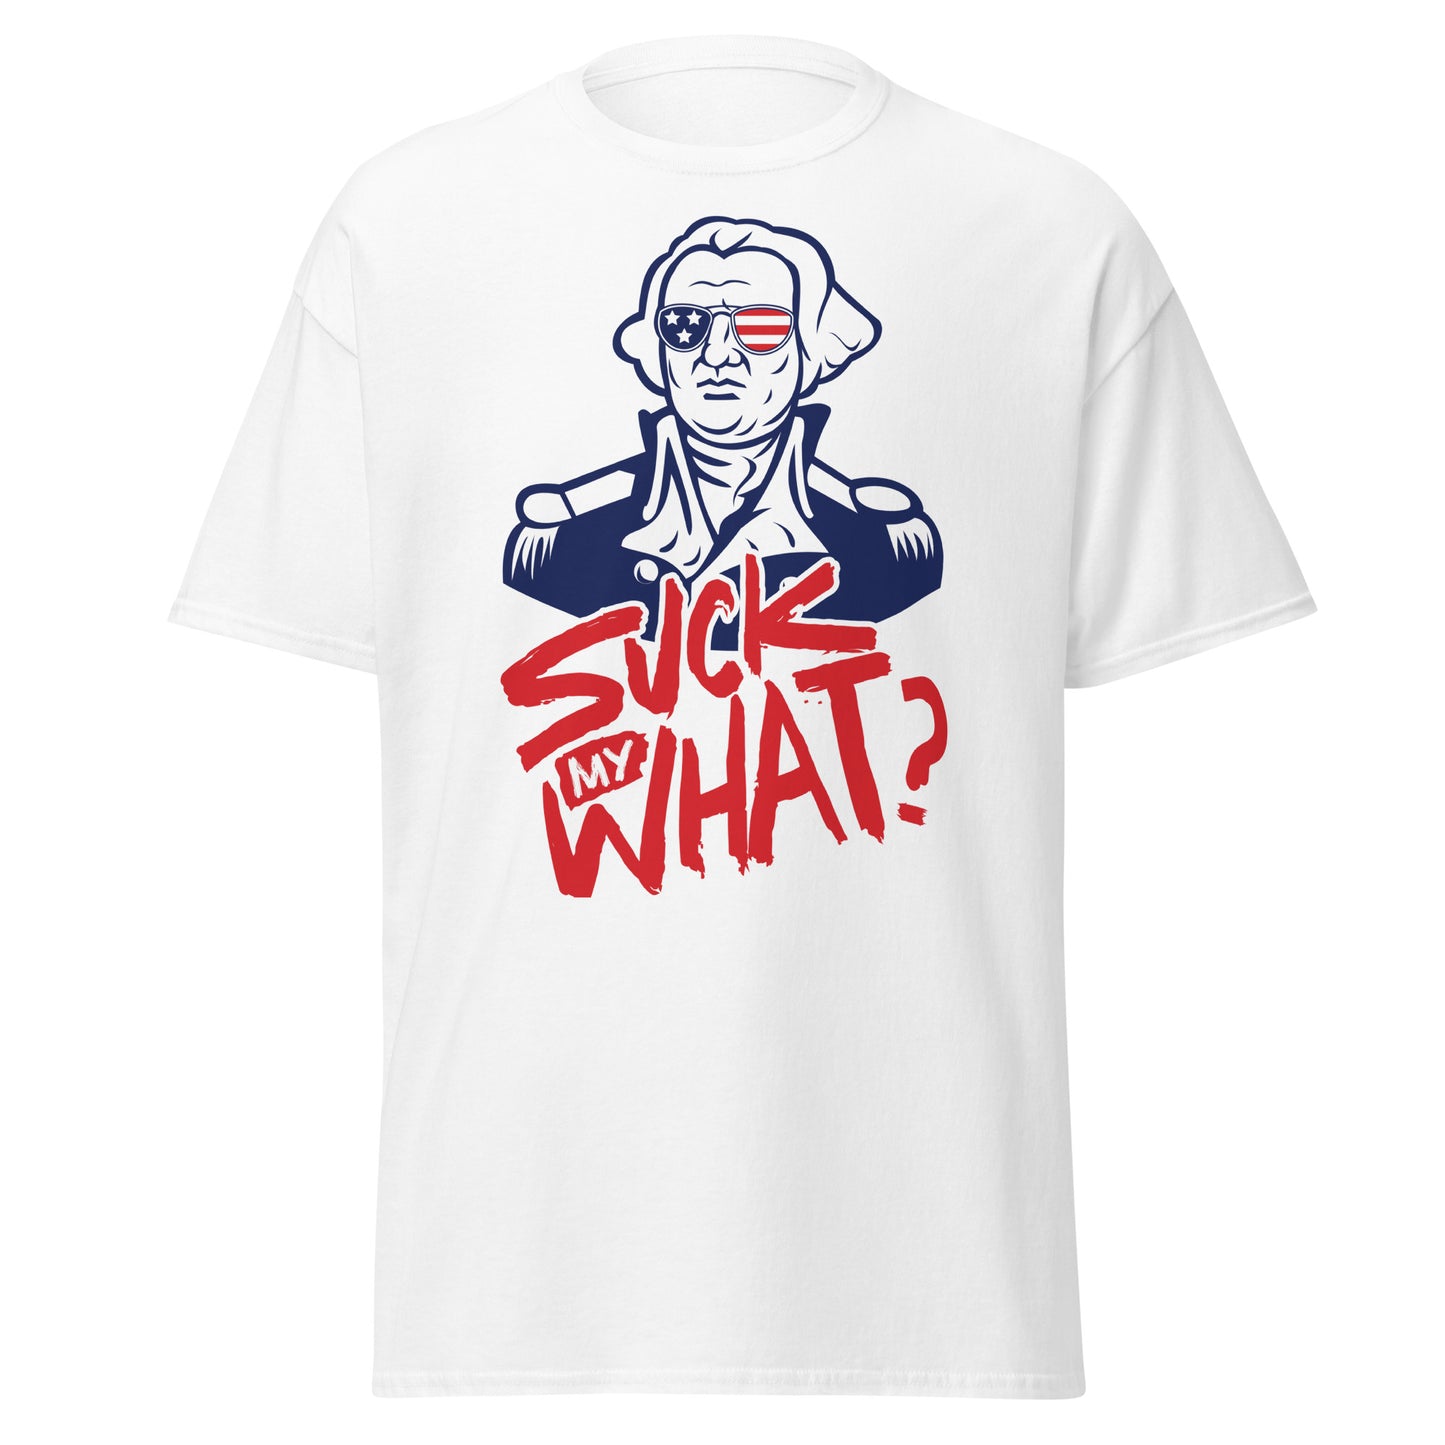 The Revolutionary - Suck My What White with Sunglasses T-Shirt - George Washington, Independence Day, 4th of July, USA Tee Shirt